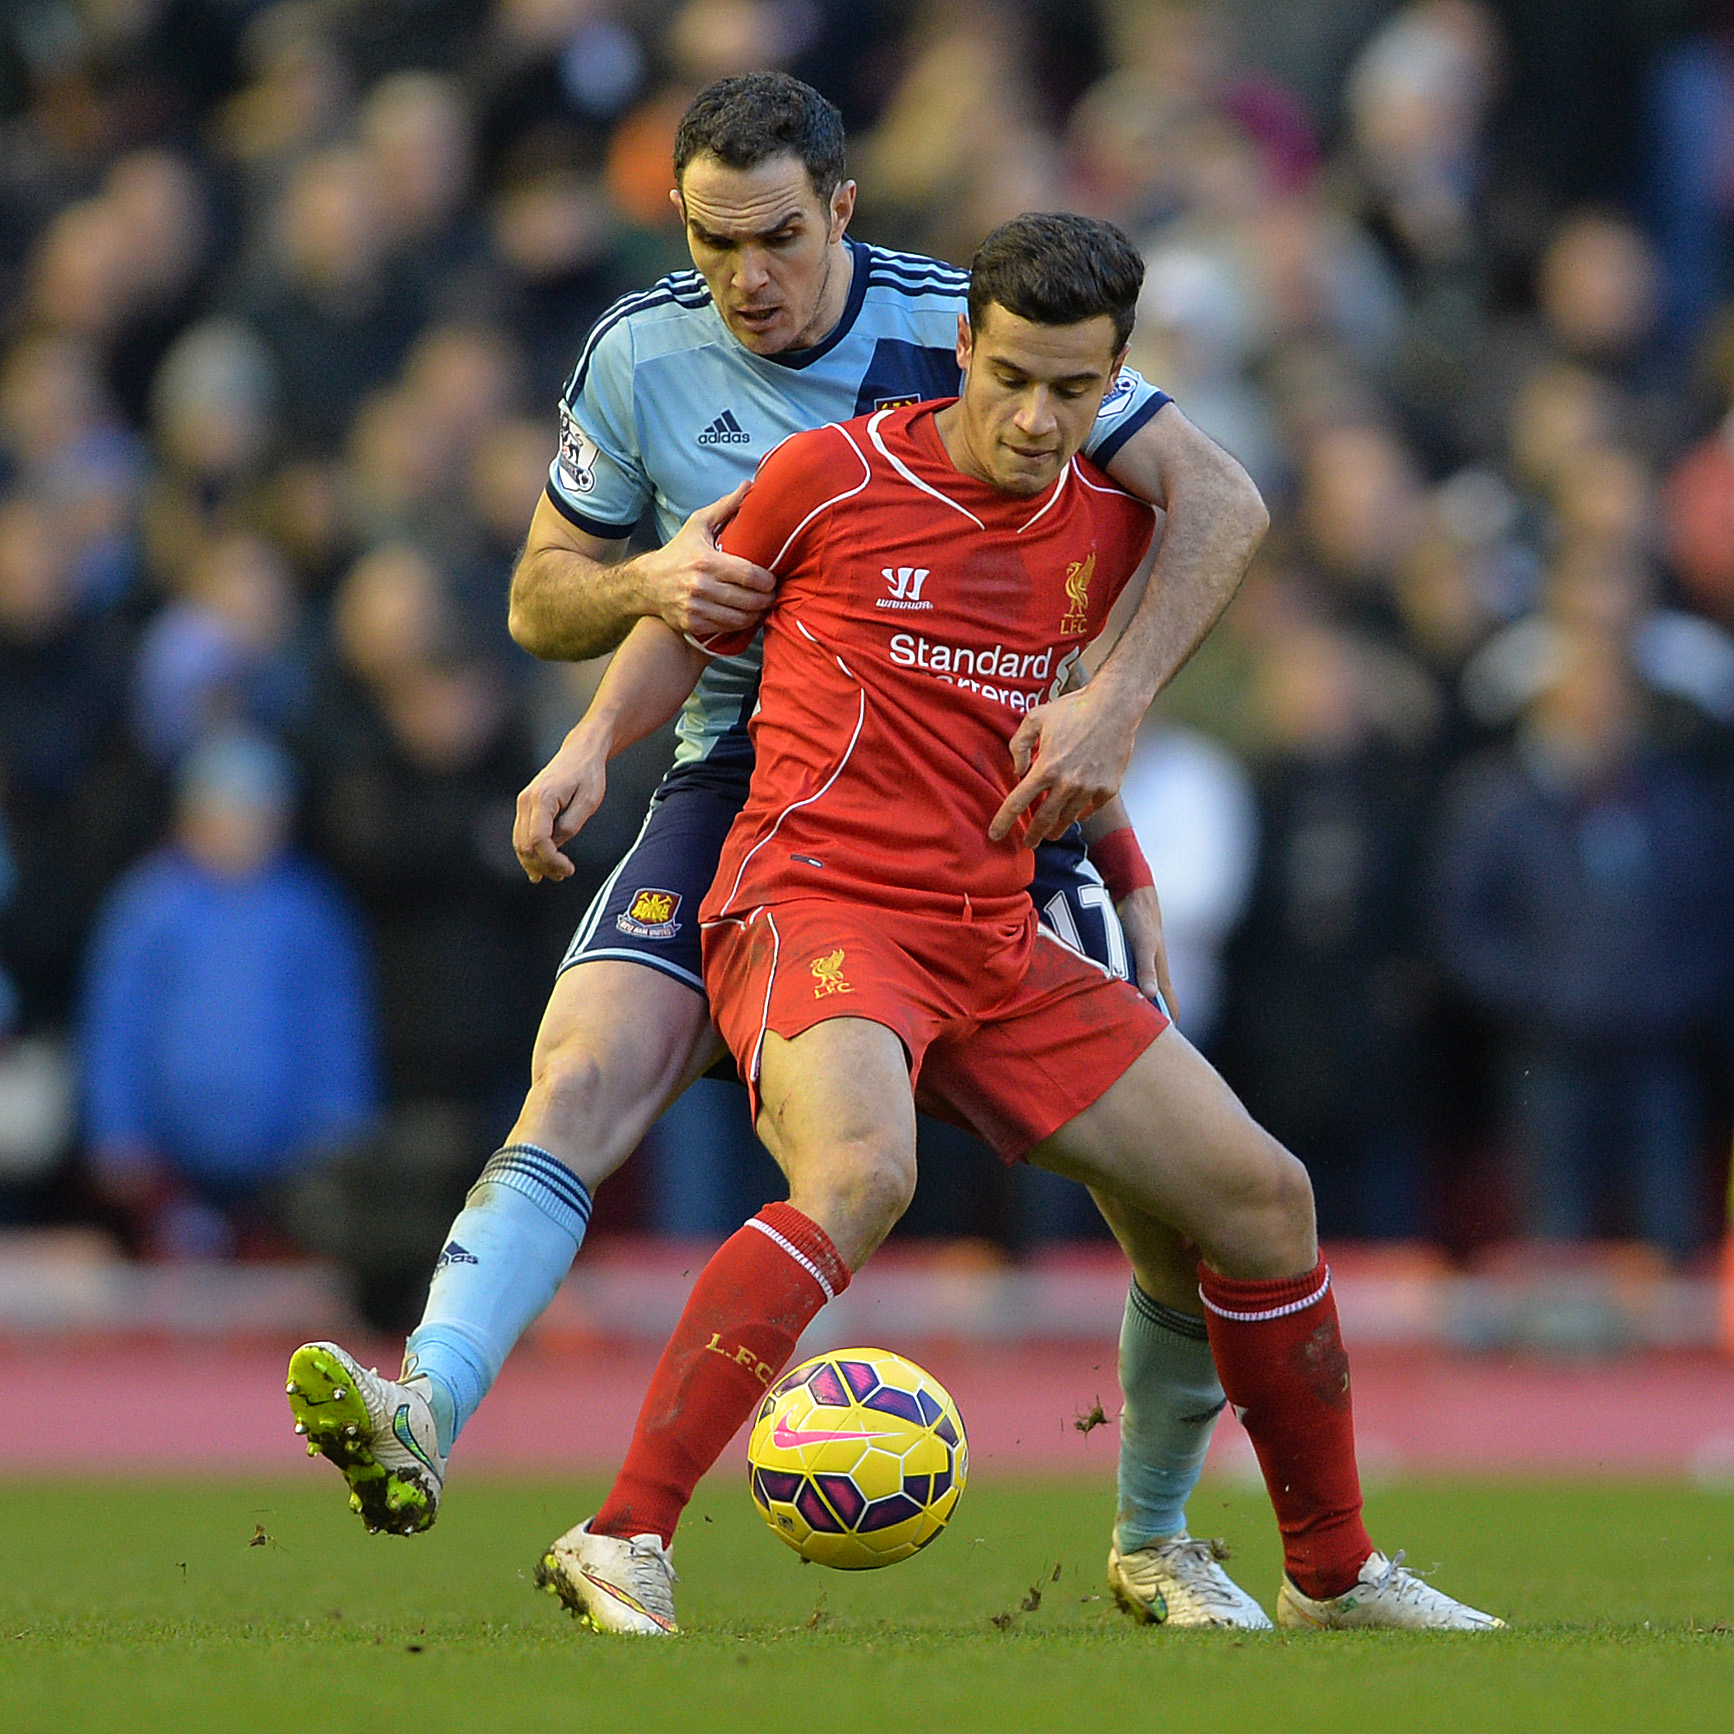 Can Coutinho prove to be the difference for Liverpool?